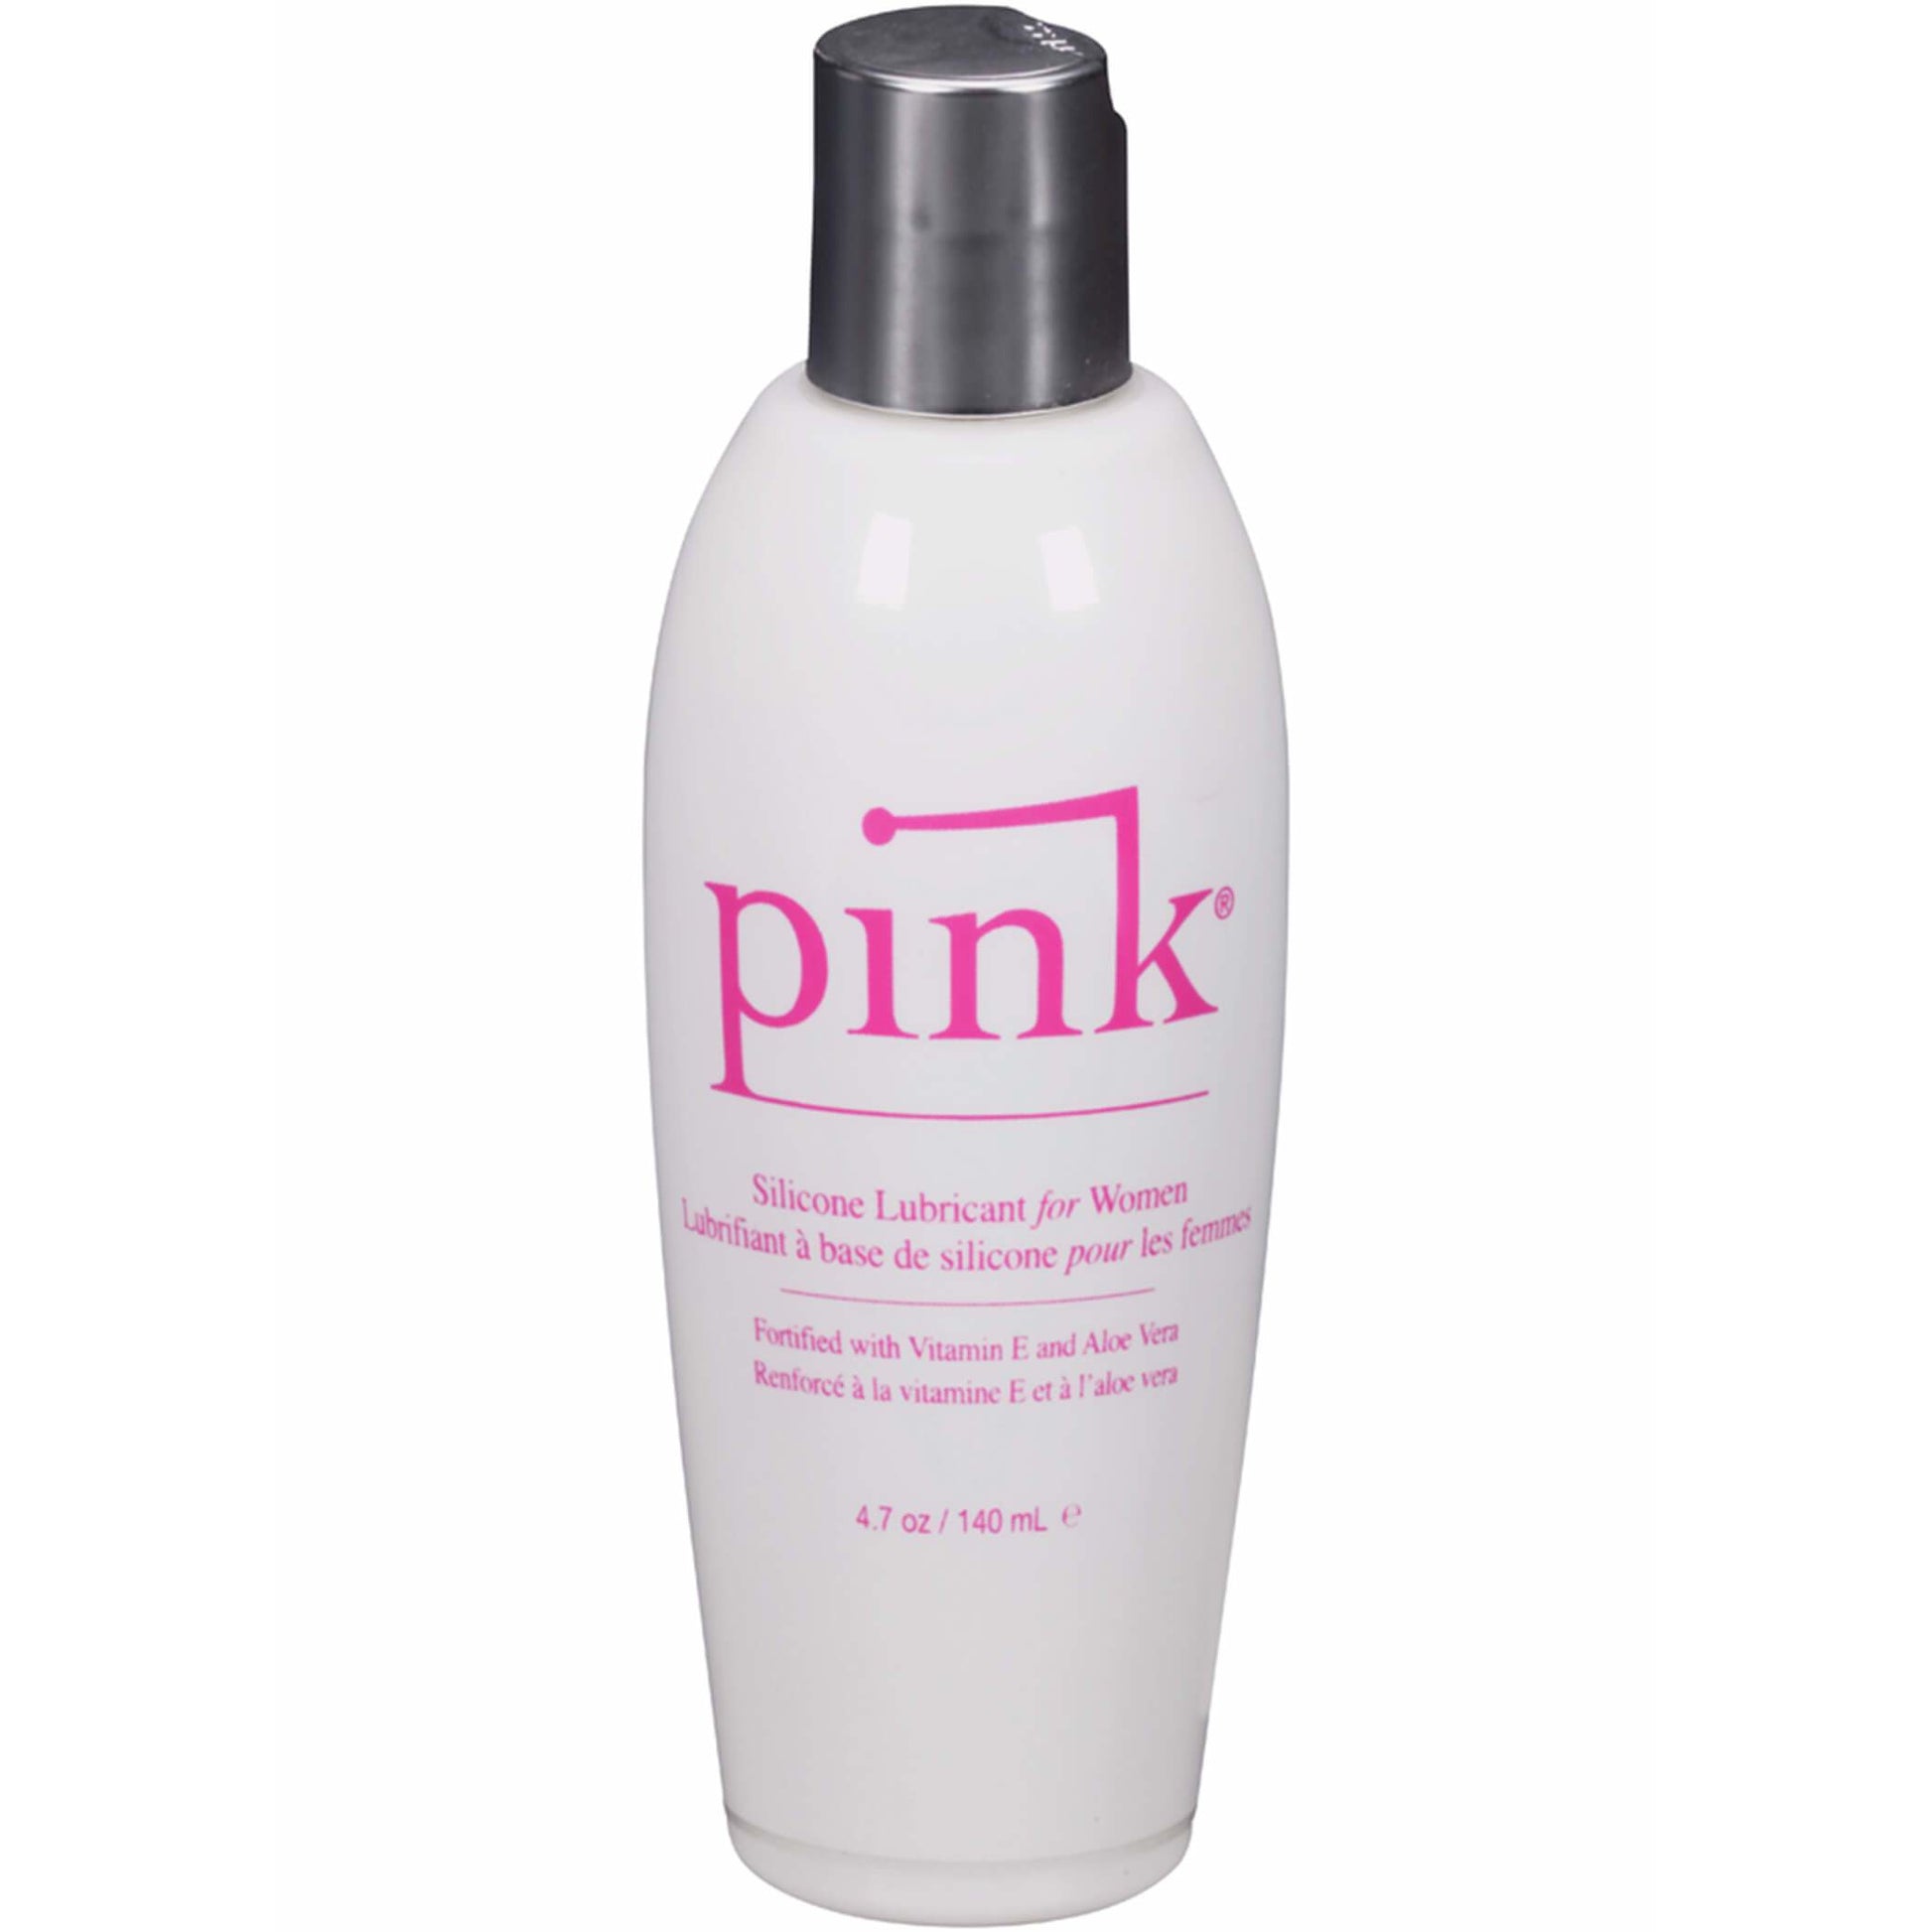 PINK Silicone Lubricant - The Bigger O online sex toy shop USA, Canada & UK shipping available